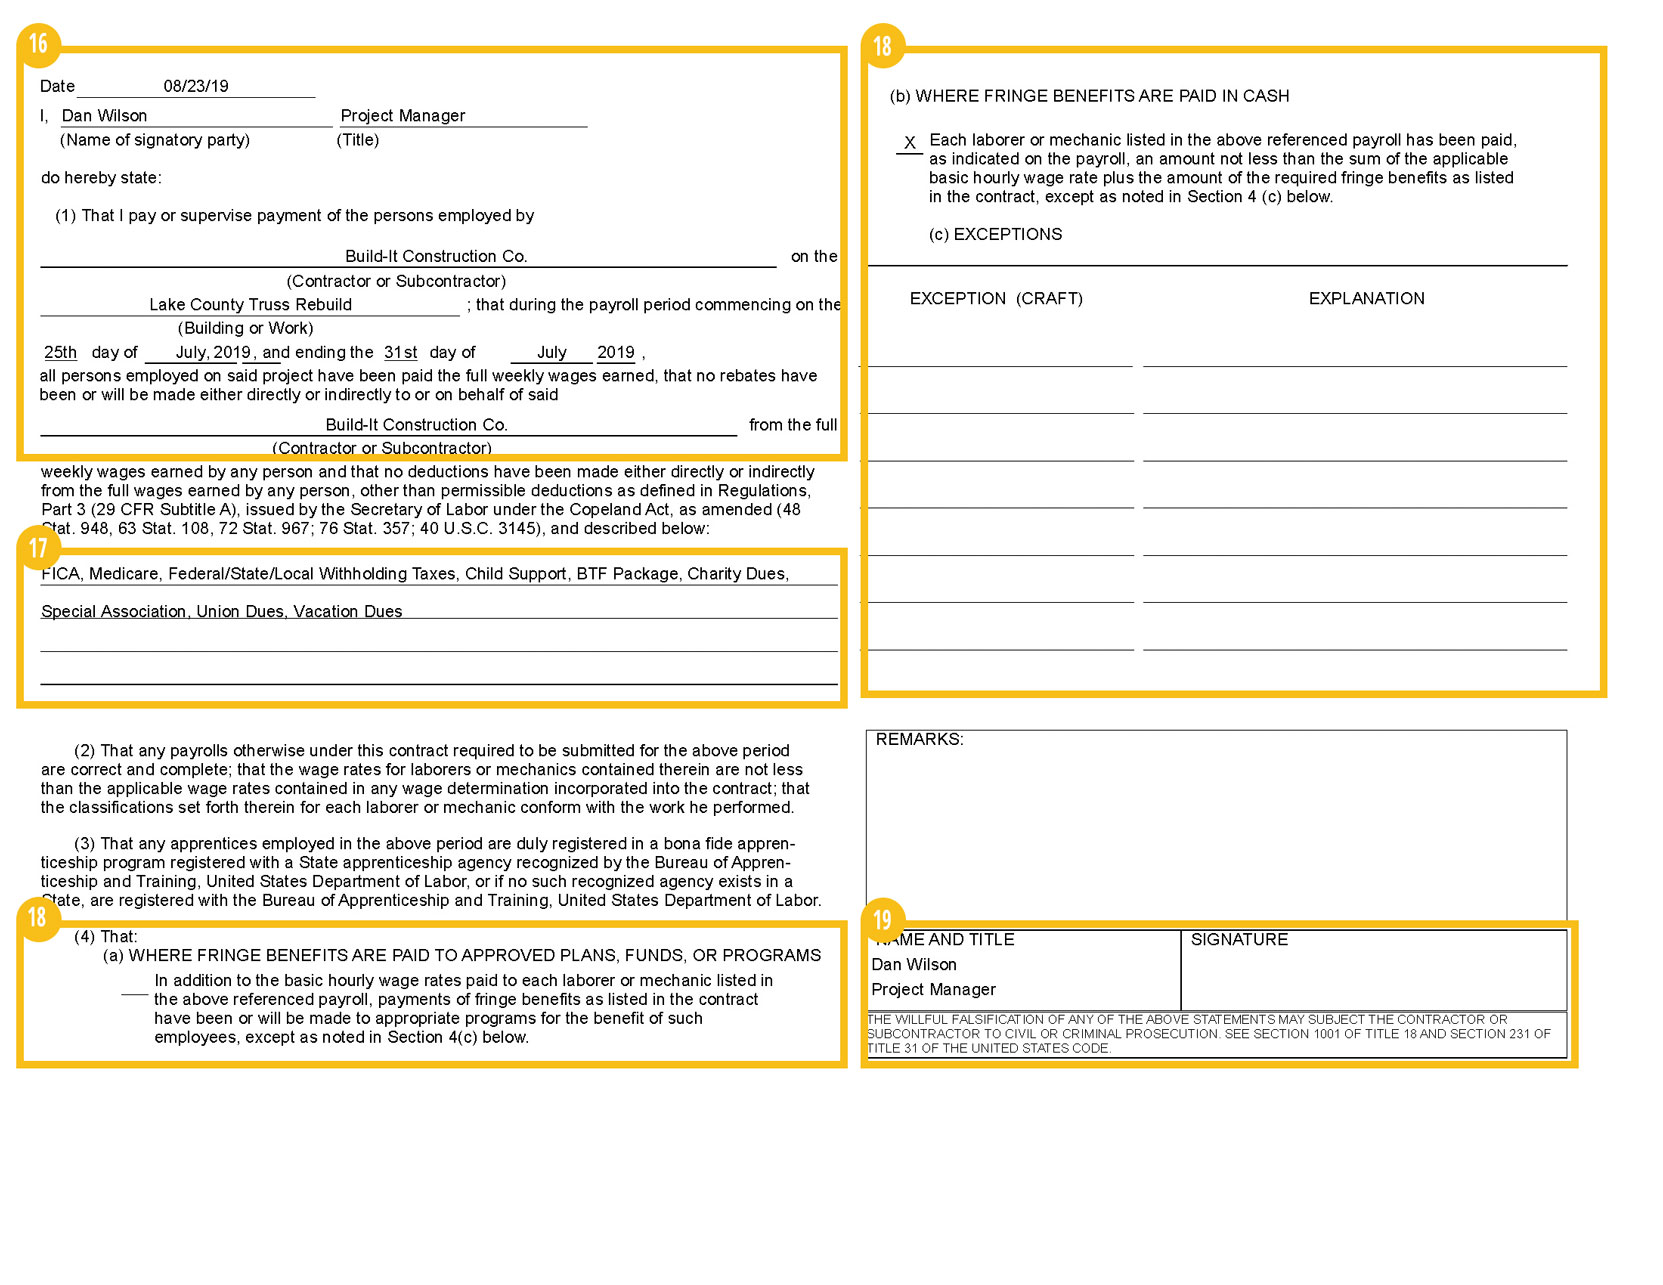 Sample WH-347 Certified Payroll Report (Page 2)